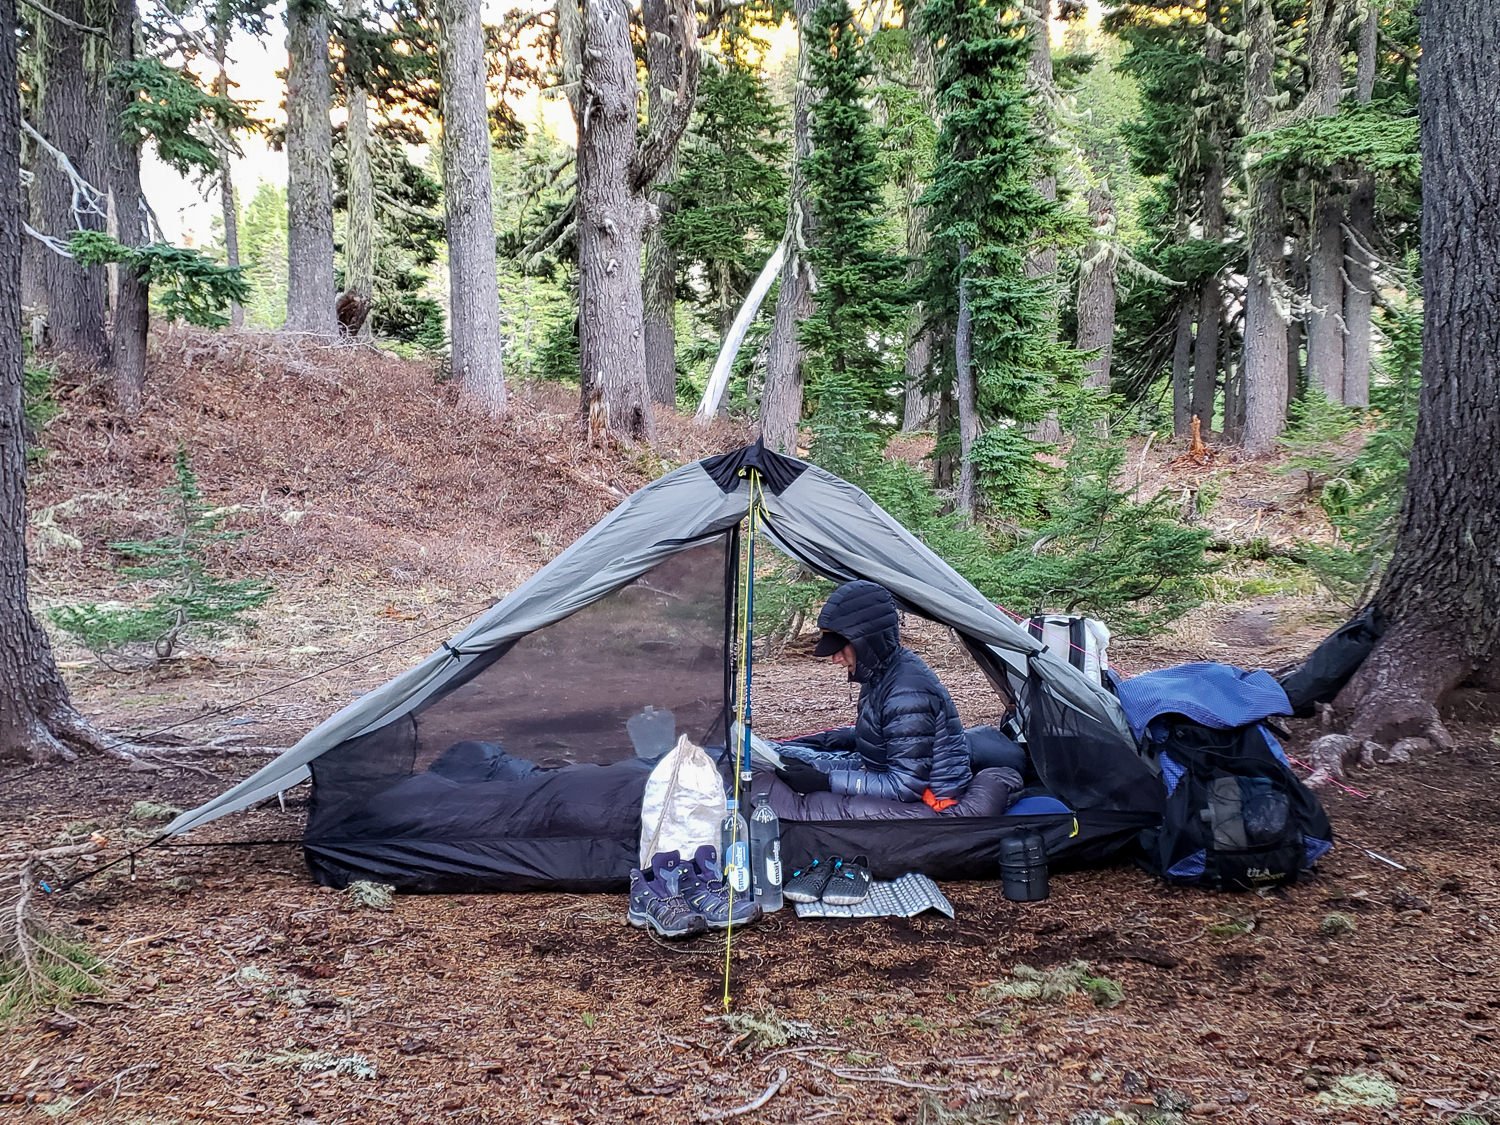 A backpacker using the Six Moon Designs Lunar Duo tent